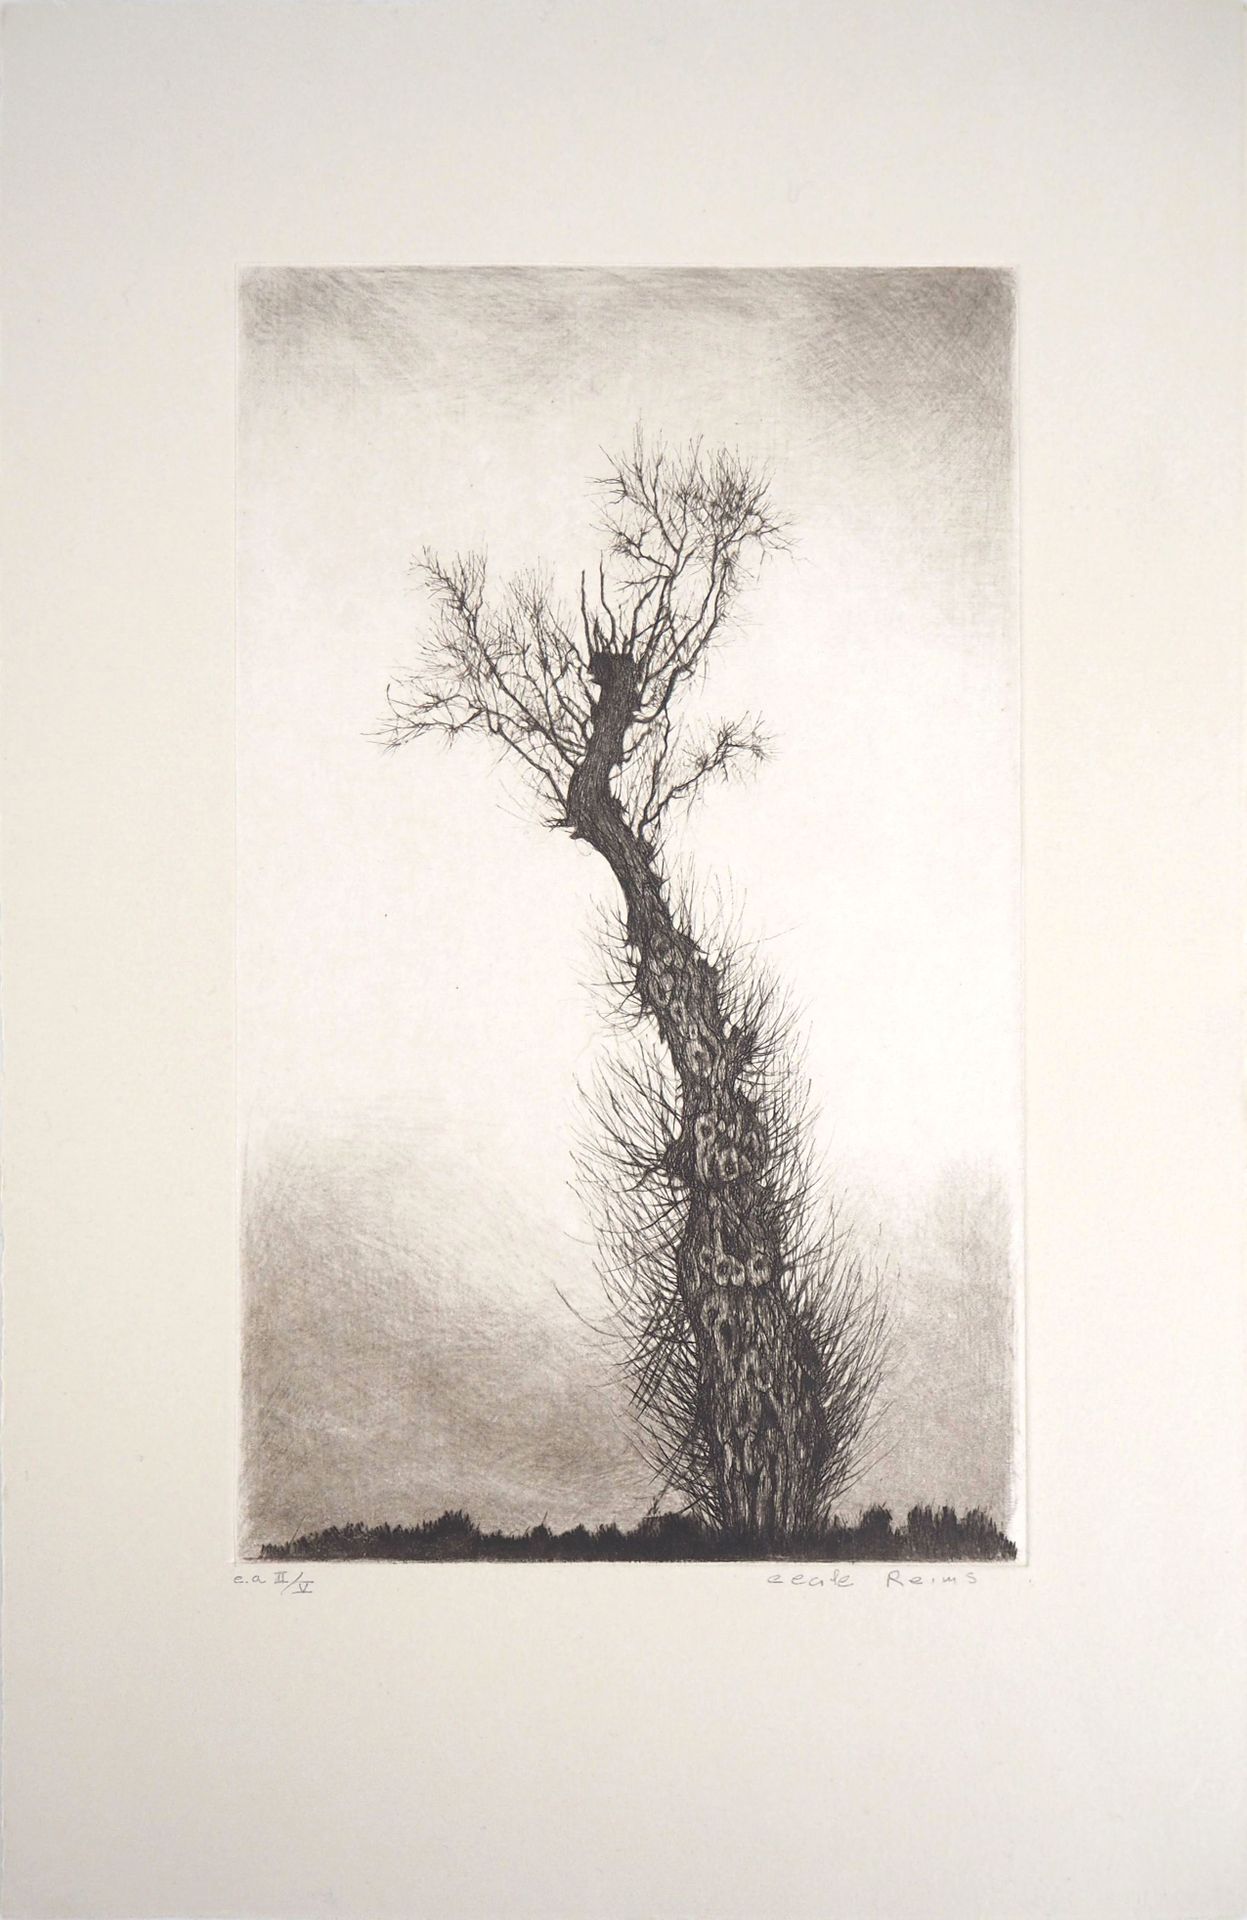 Cécile REIMS Cecile REIMS Abandoned tree Original drypoint etching Signed in pen&hellip;